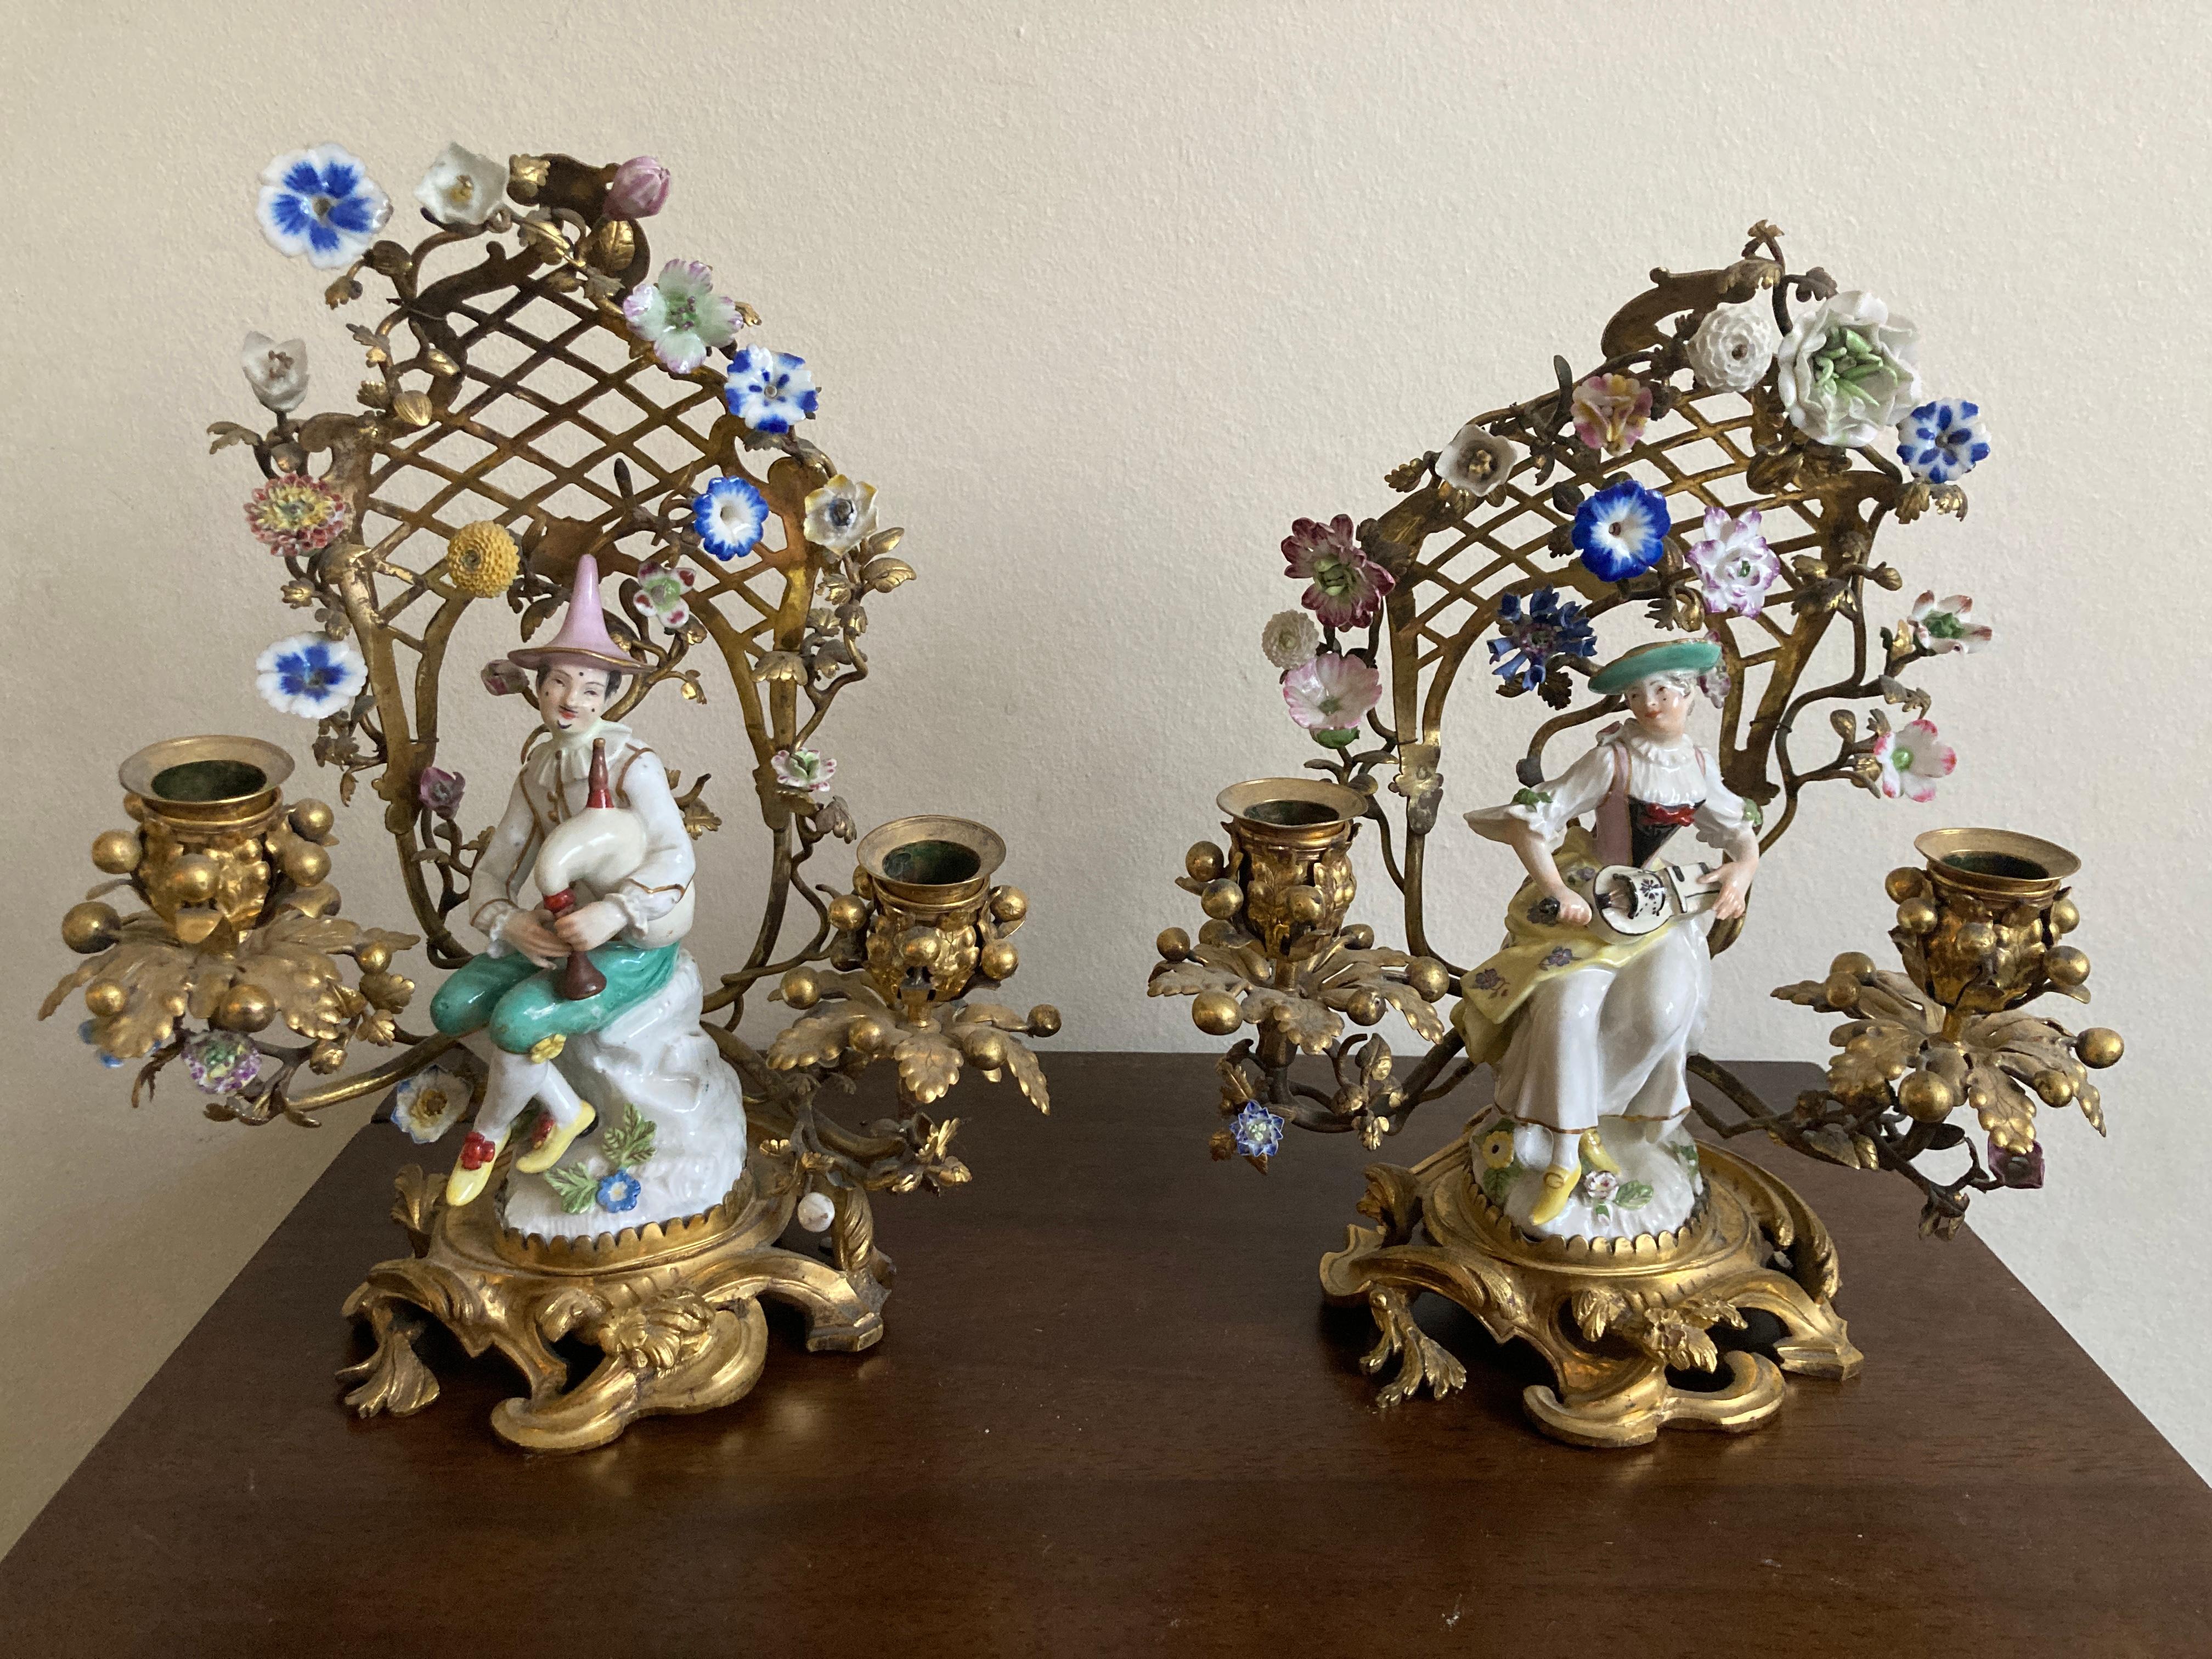 Meissen Porcelain Figurines, Pair of seated Musician figures. 14cm high figures, 

Crossed swords mark to rear of base, c1745.

Both figures mounted in an 18th Century ormolu arbour set, 25cm overall height

